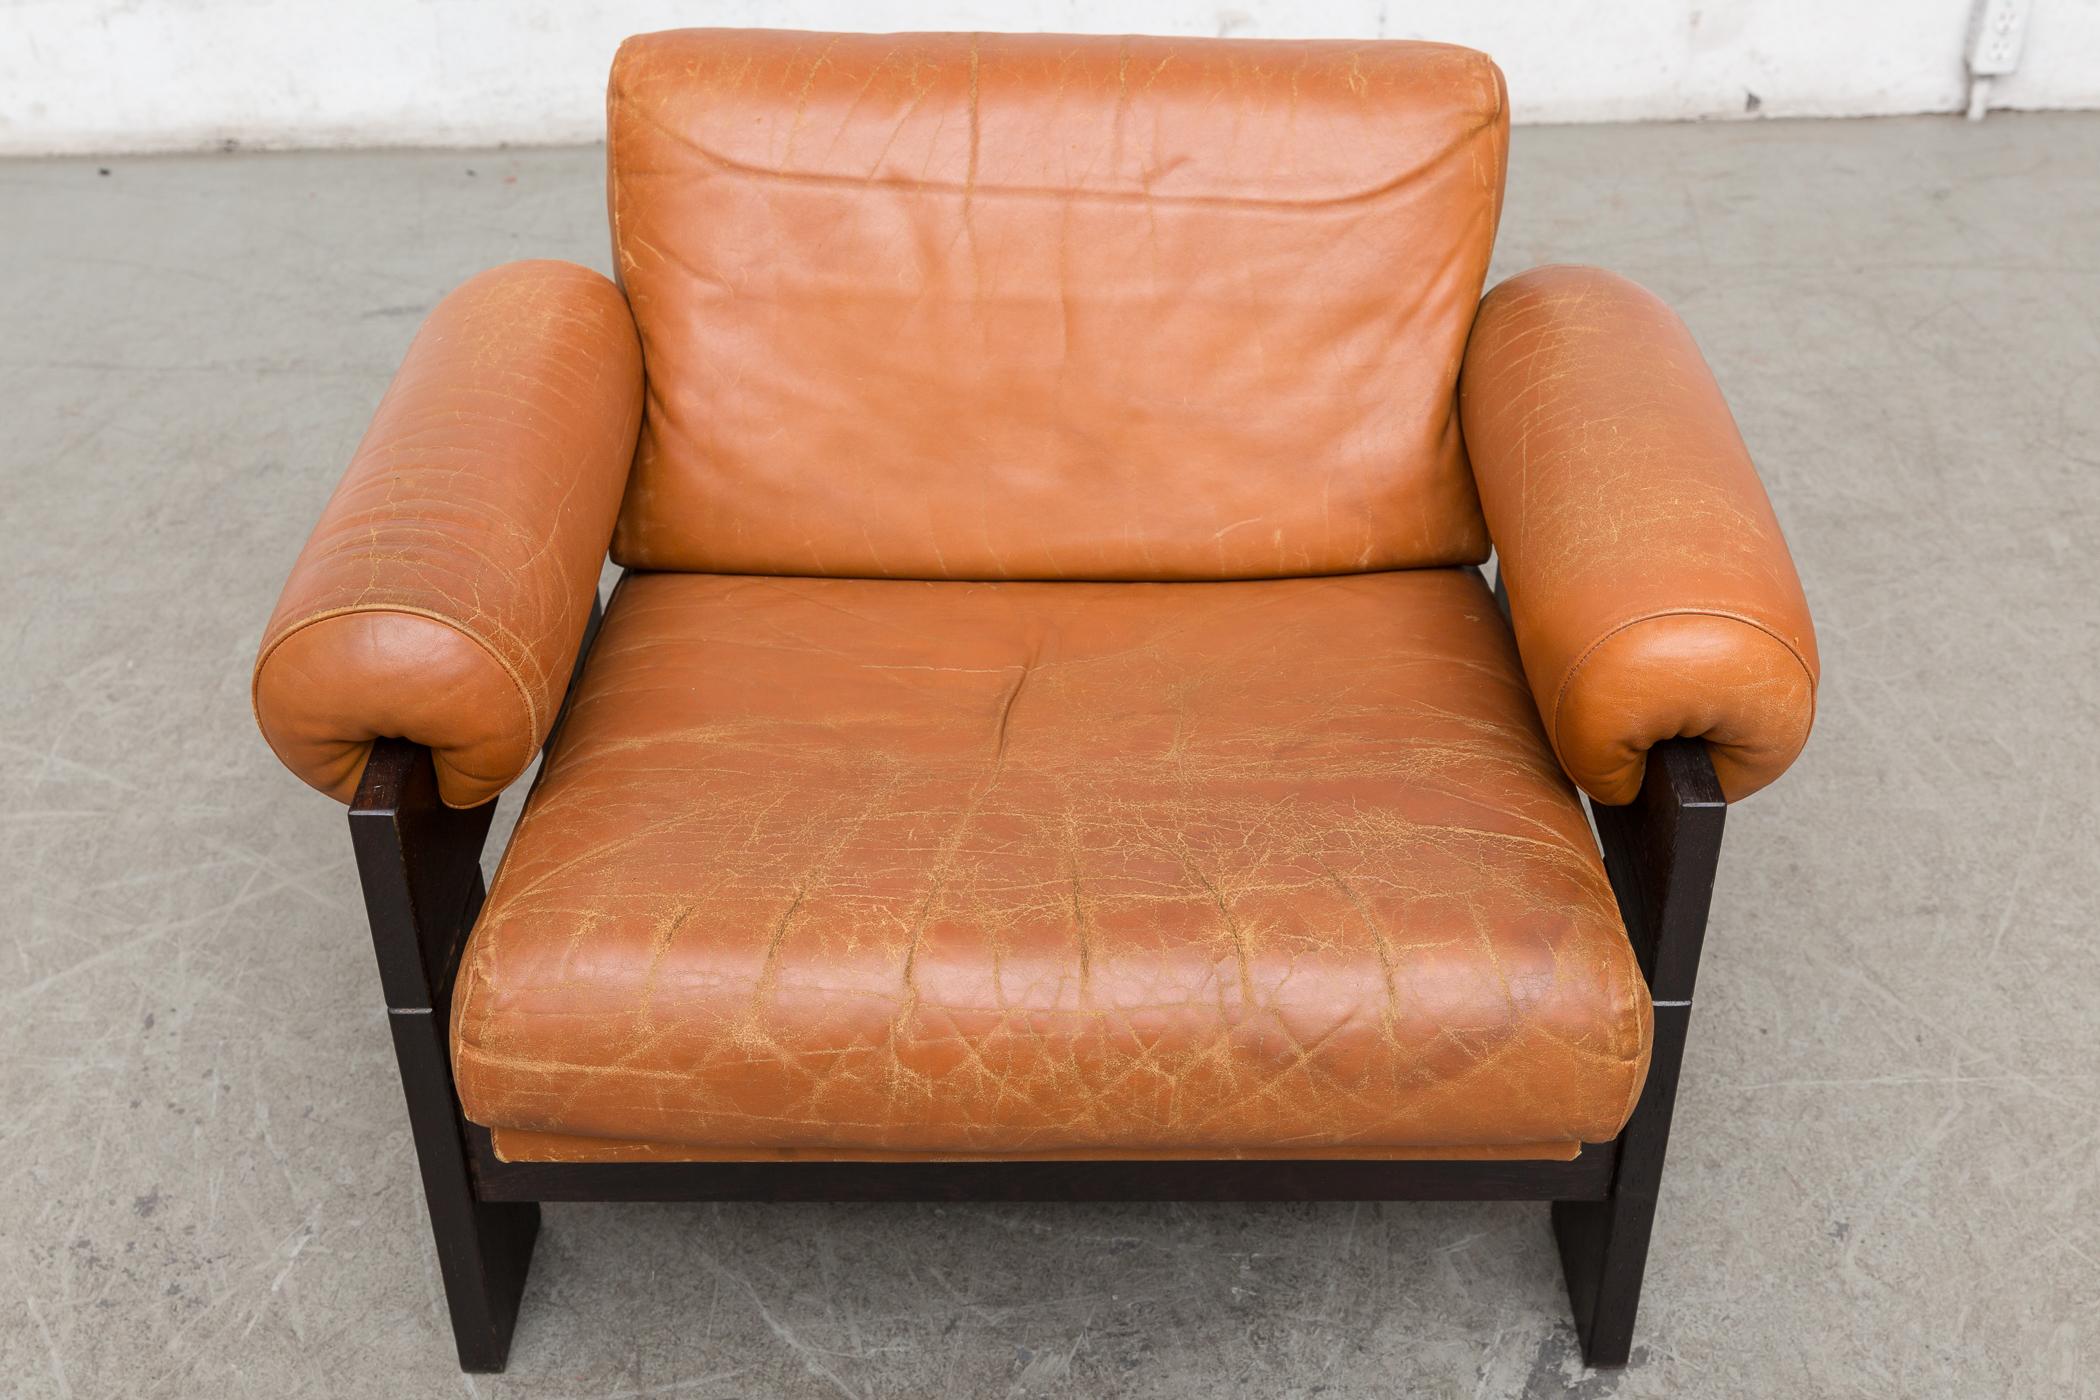 Mid-20th Century Martin Visser Rust Leather and Wenge Lounge Chair